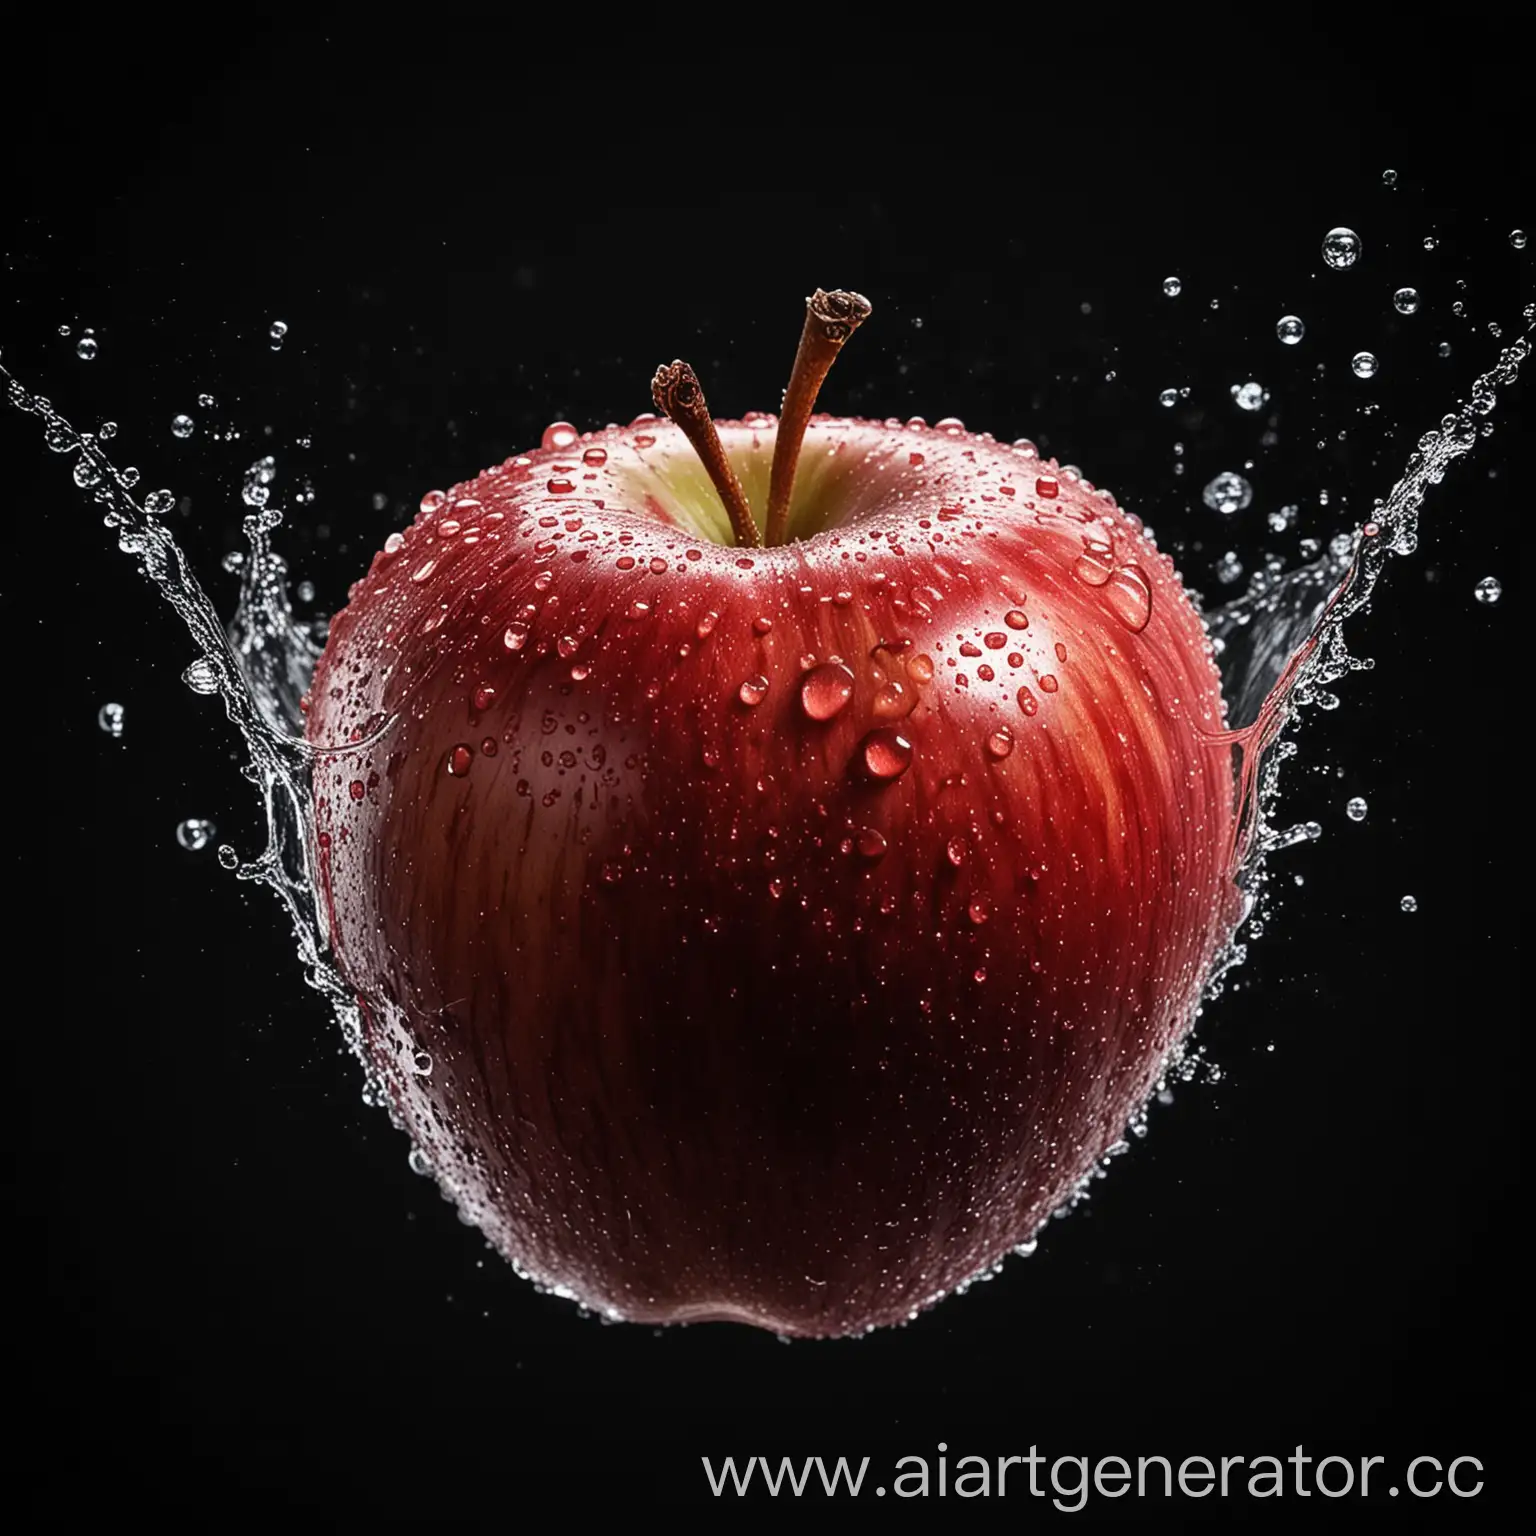 Red-Juicy-Apple-in-Droplets-of-Water-on-Black-Background-Composition